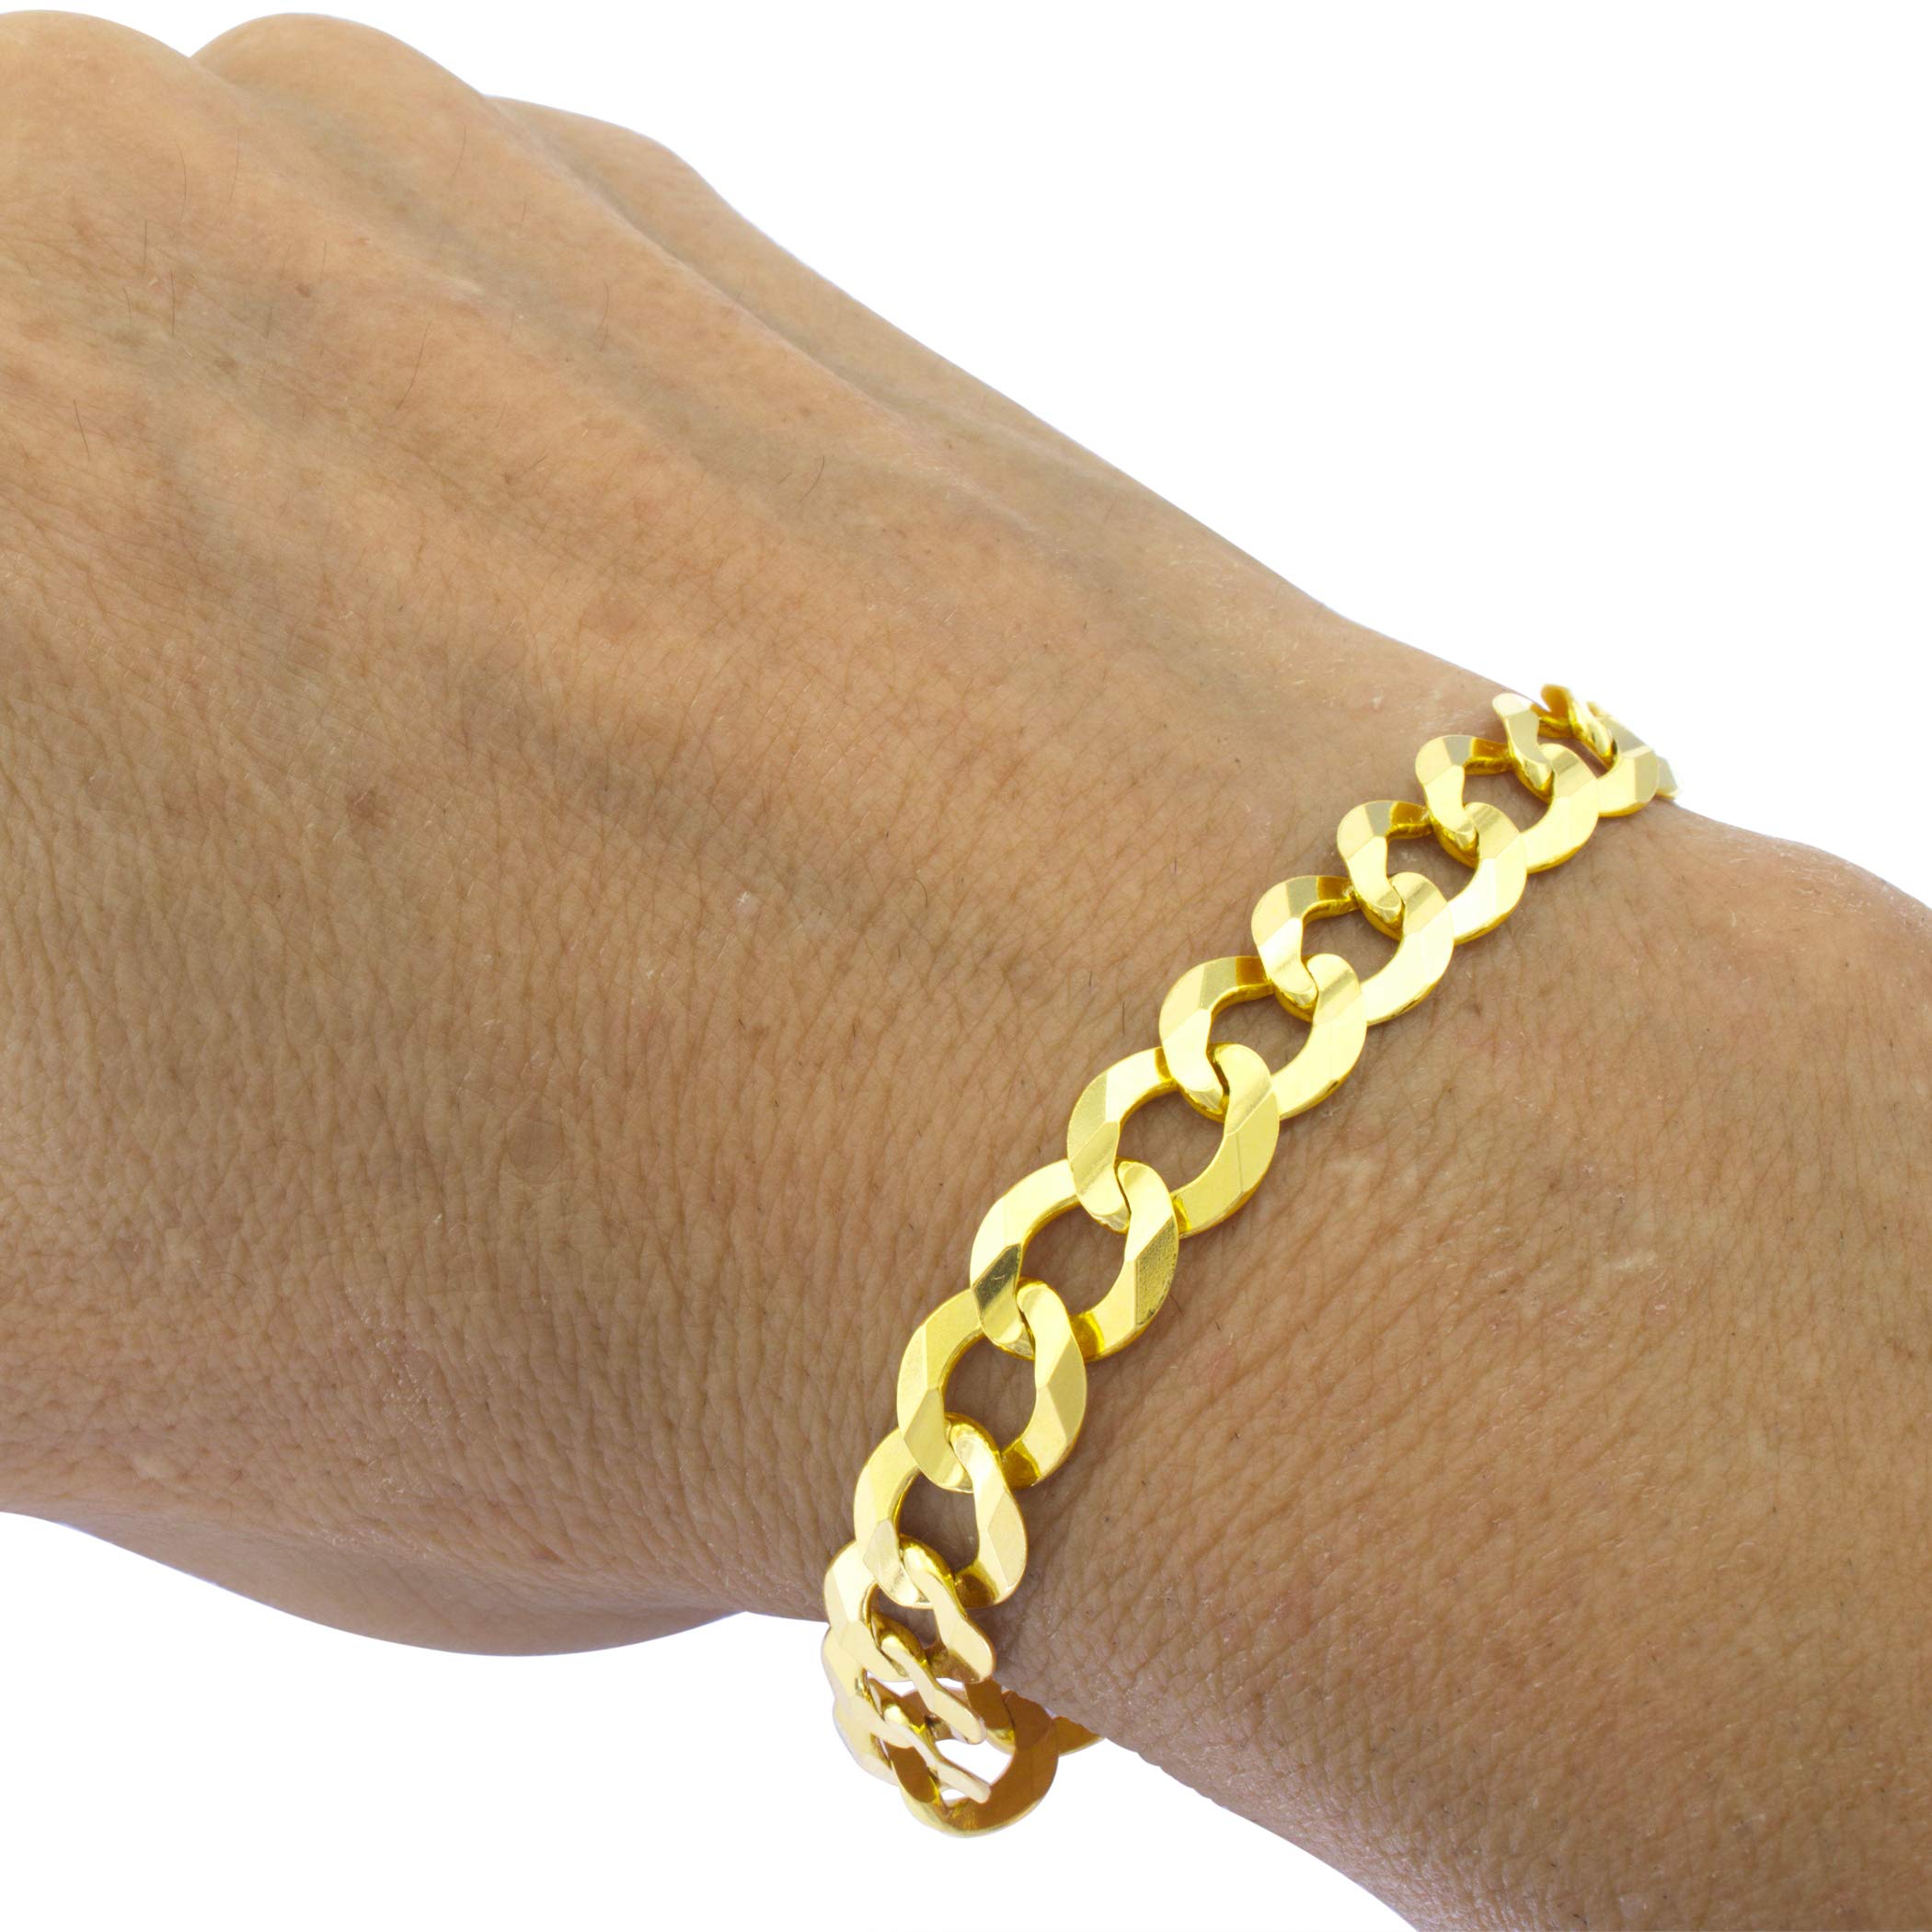 Nuragold 10k Yellow Gold 10mm Solid Cuban Curb Link Chain Bracelet, Mens Jewelry 7